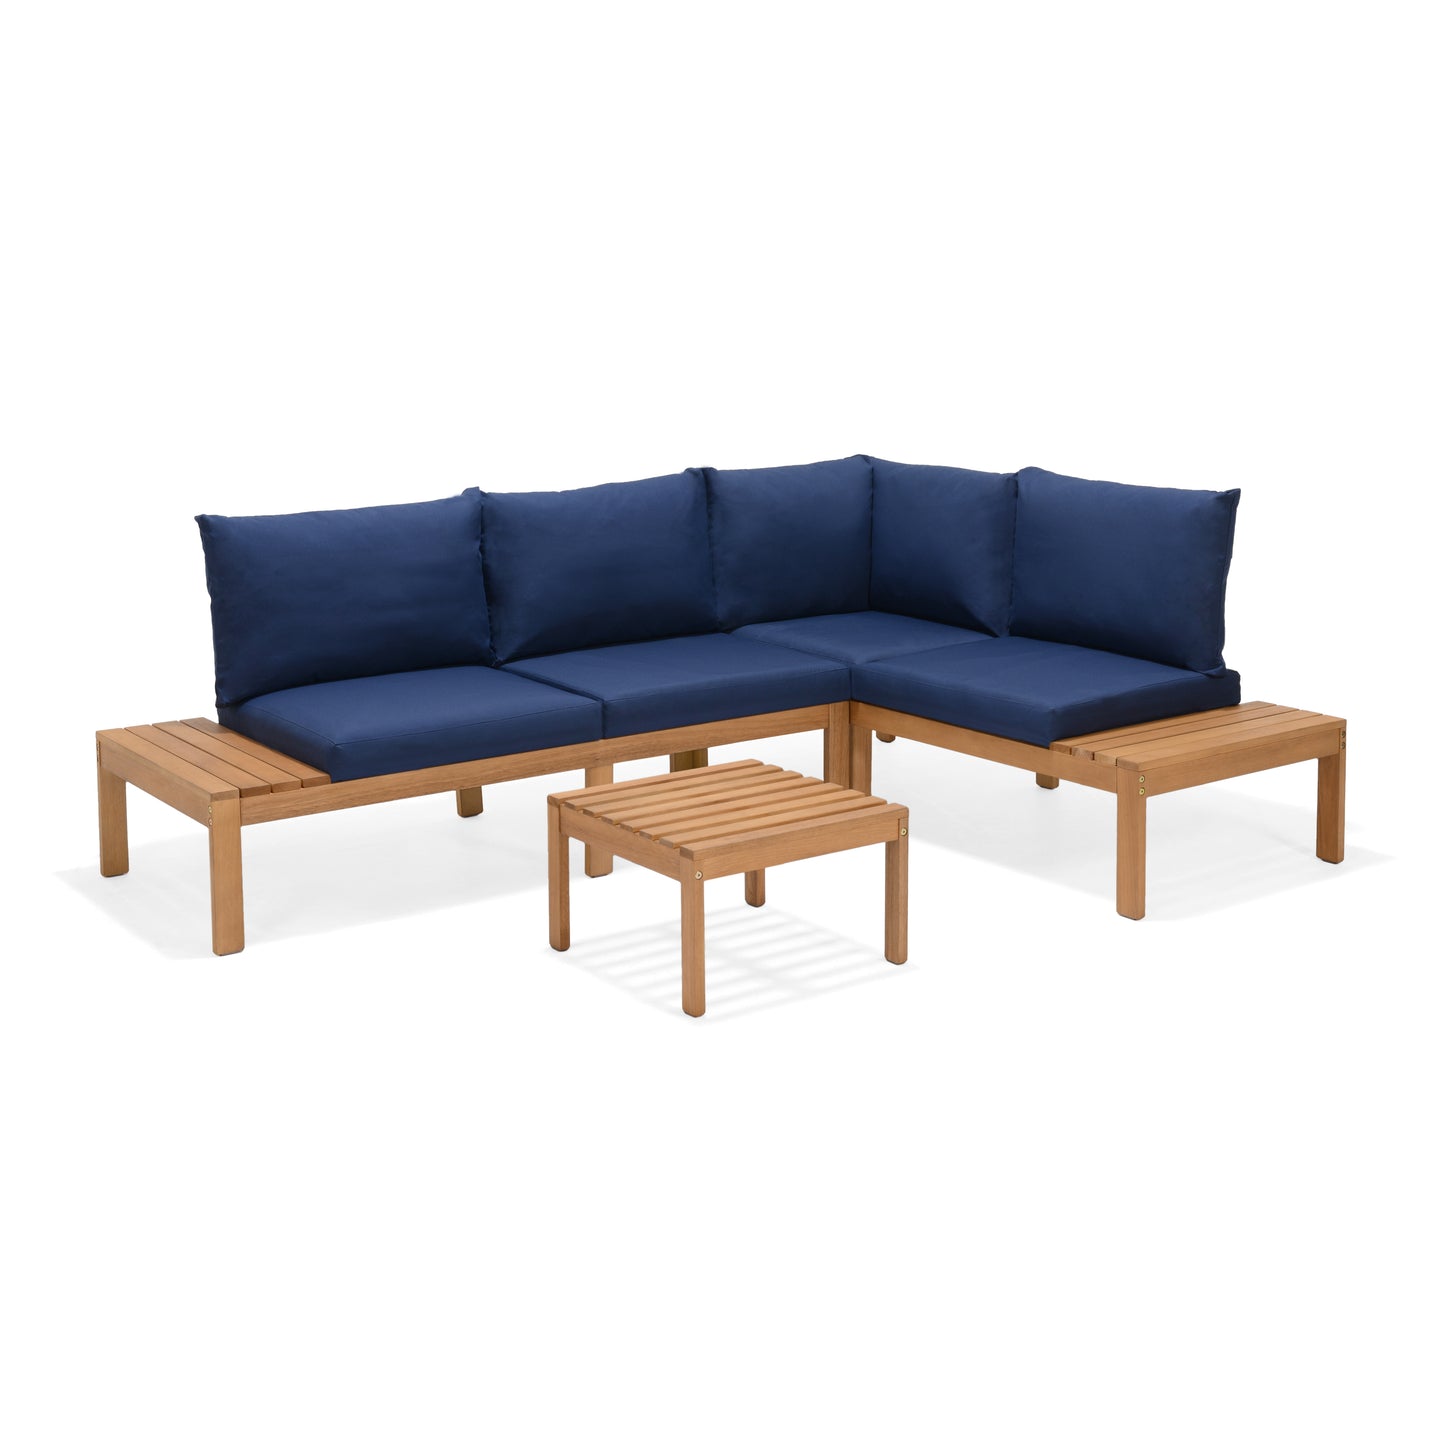 Griffin 100% FSC Certified Solid Wood With Cushion Seating Set